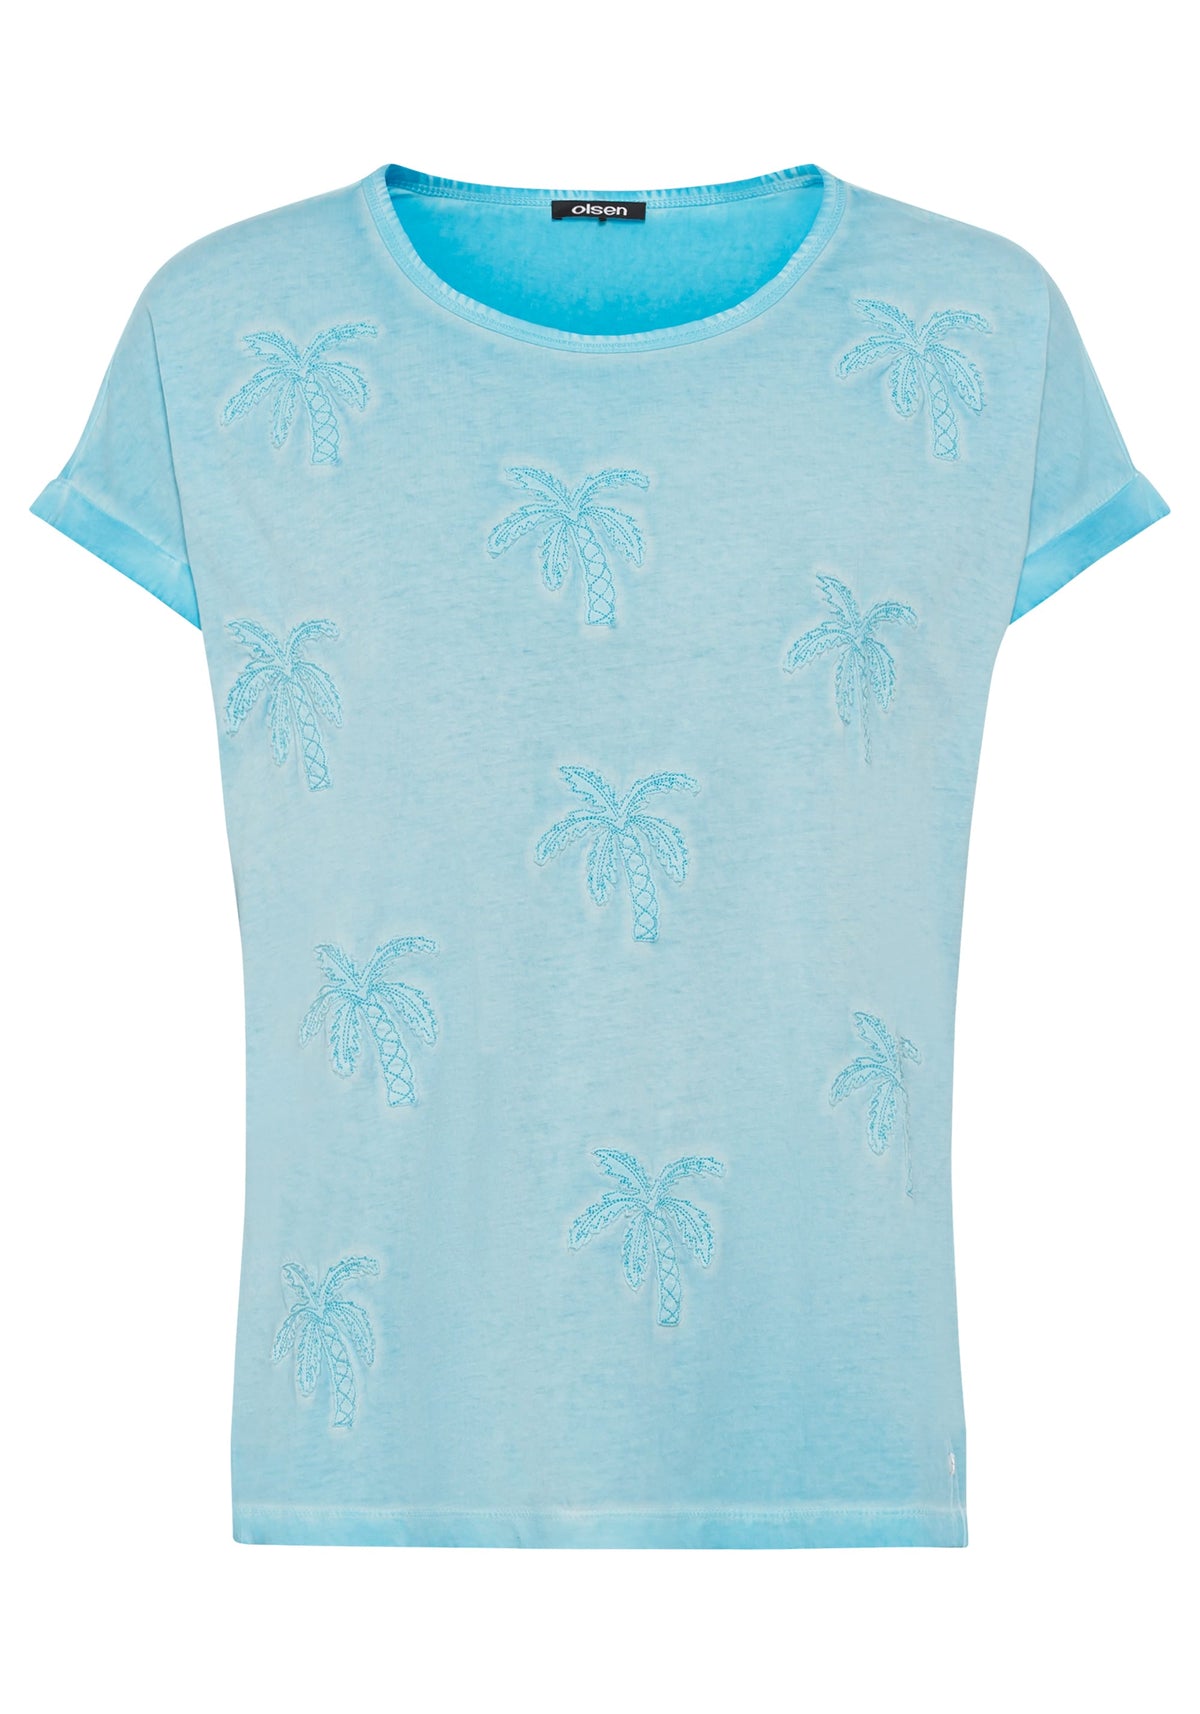 100% Cotton Short Sun-Bleached Tee with Palm Tree Applique